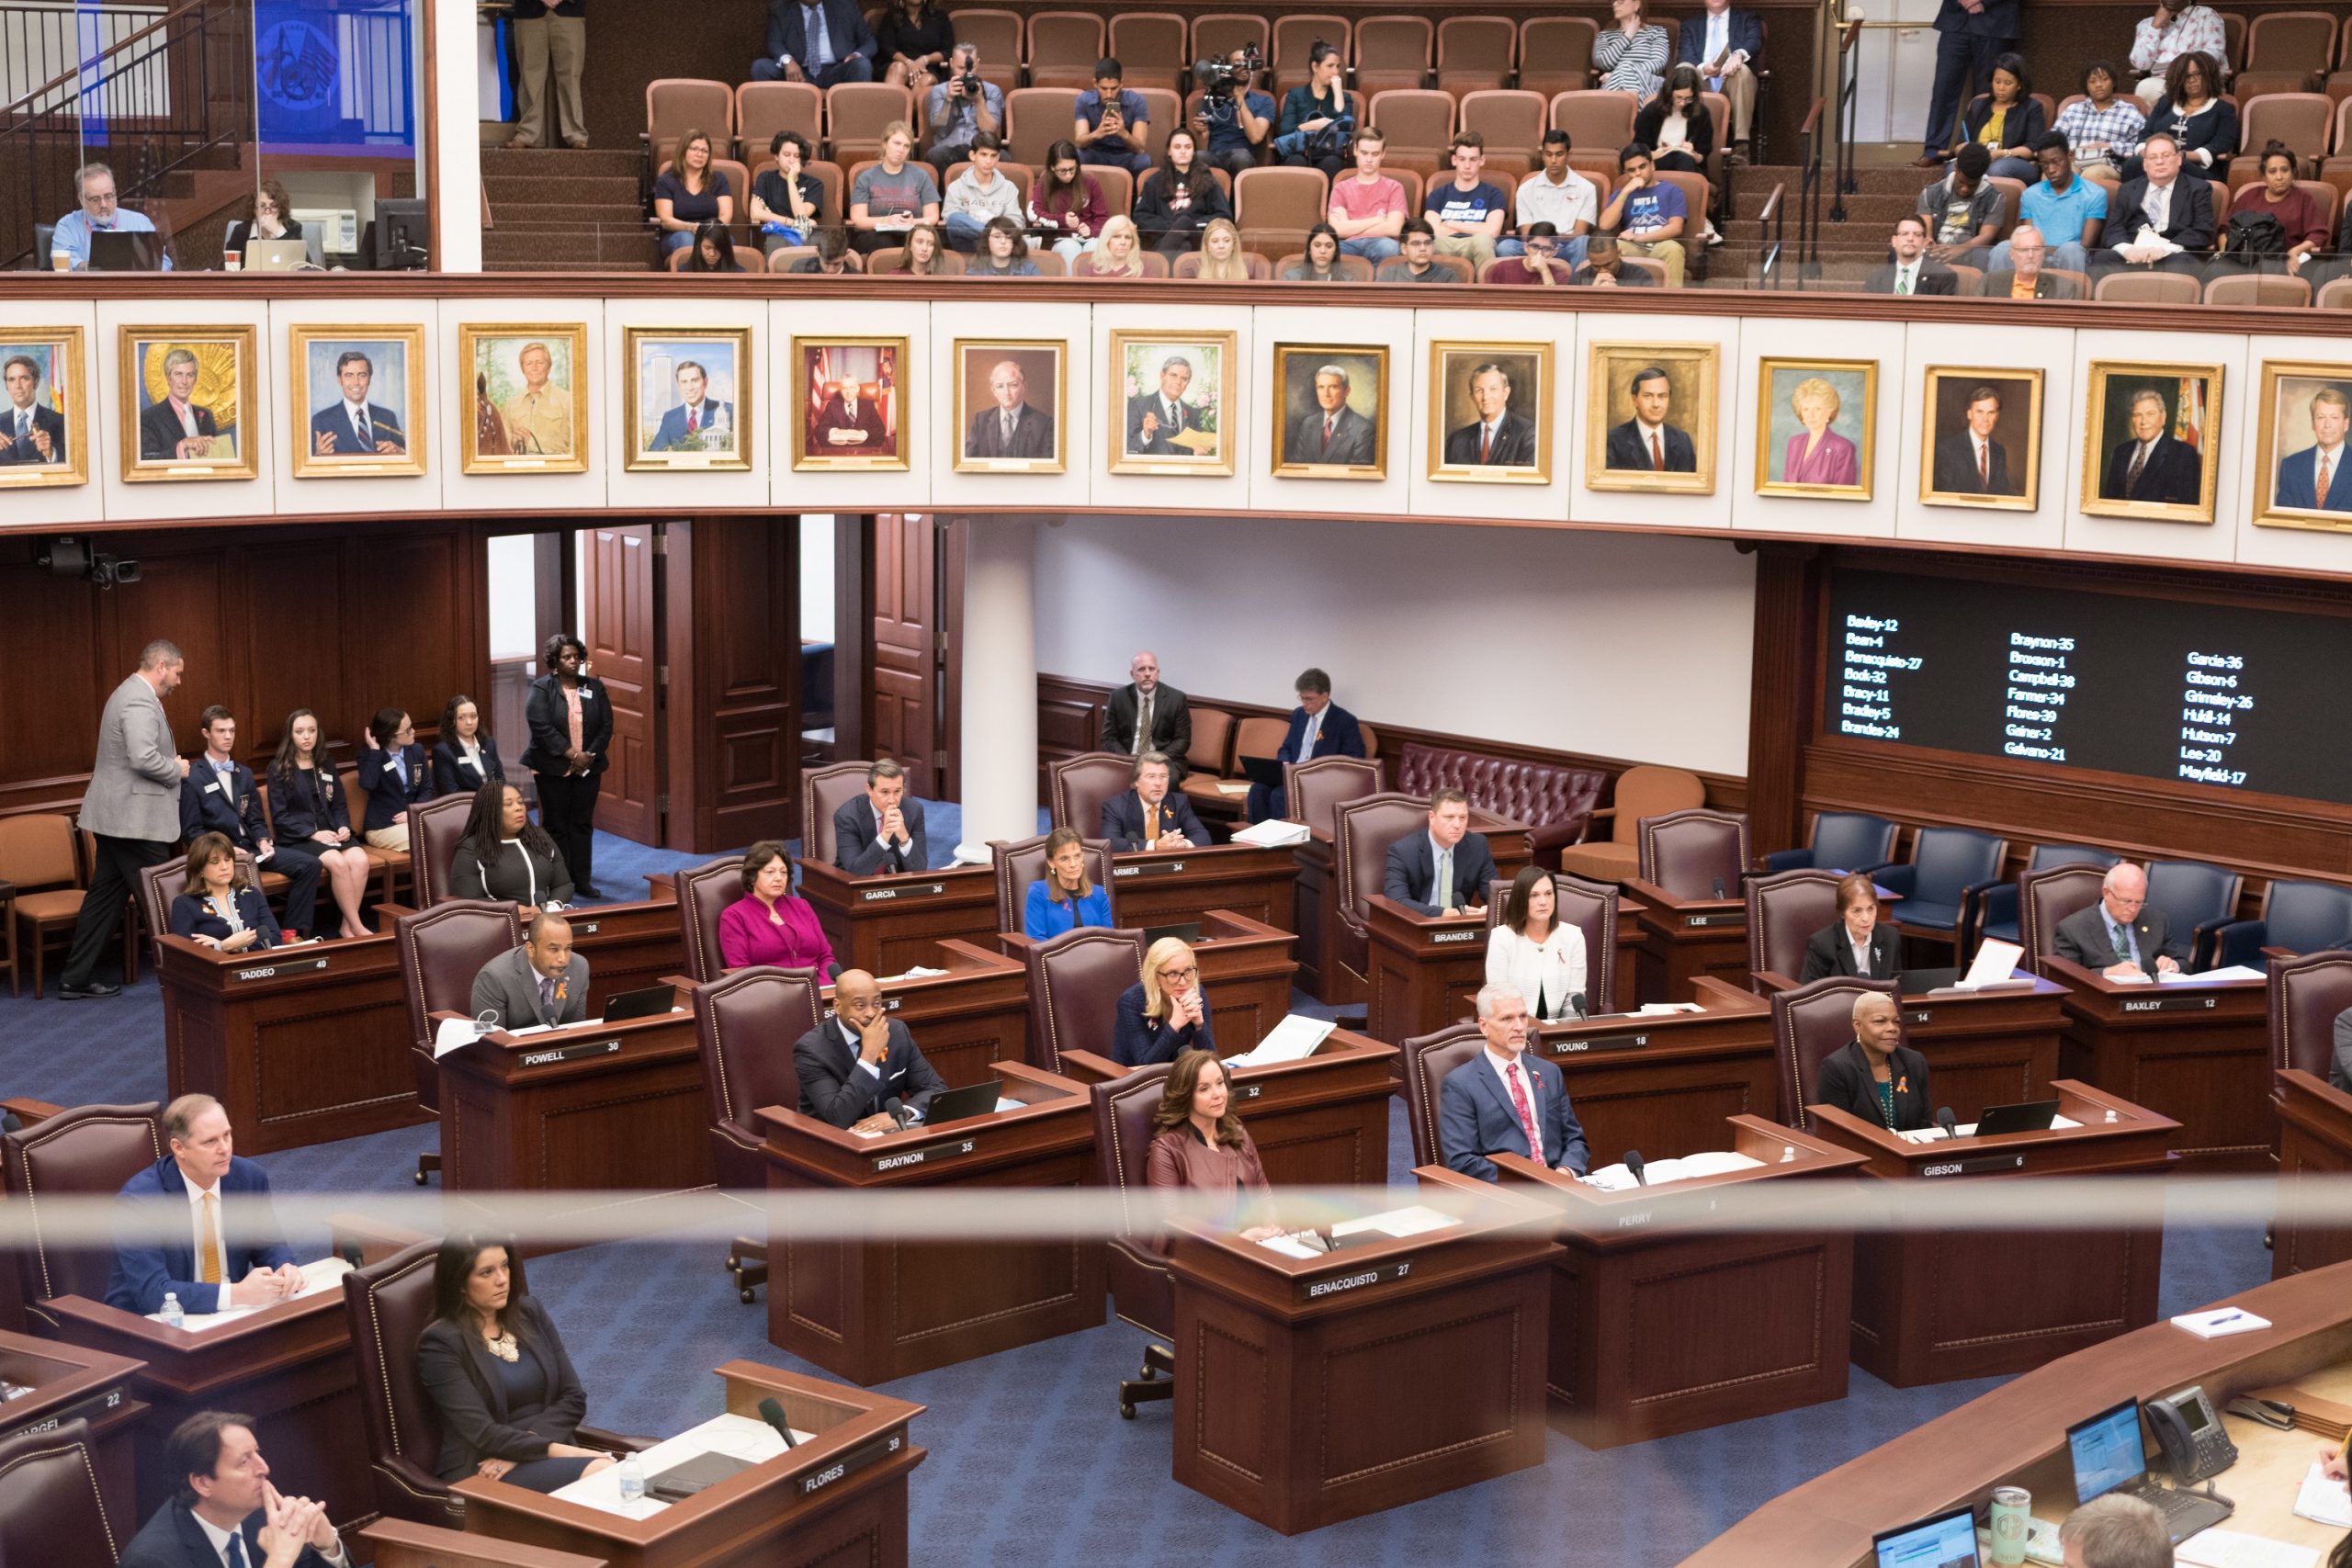 The Florida House of Representatives convenes in the Chamber in the Florida Capitol Building in Tallahassee as MSD students watch from the balcony. Photo by Kevin Trejos